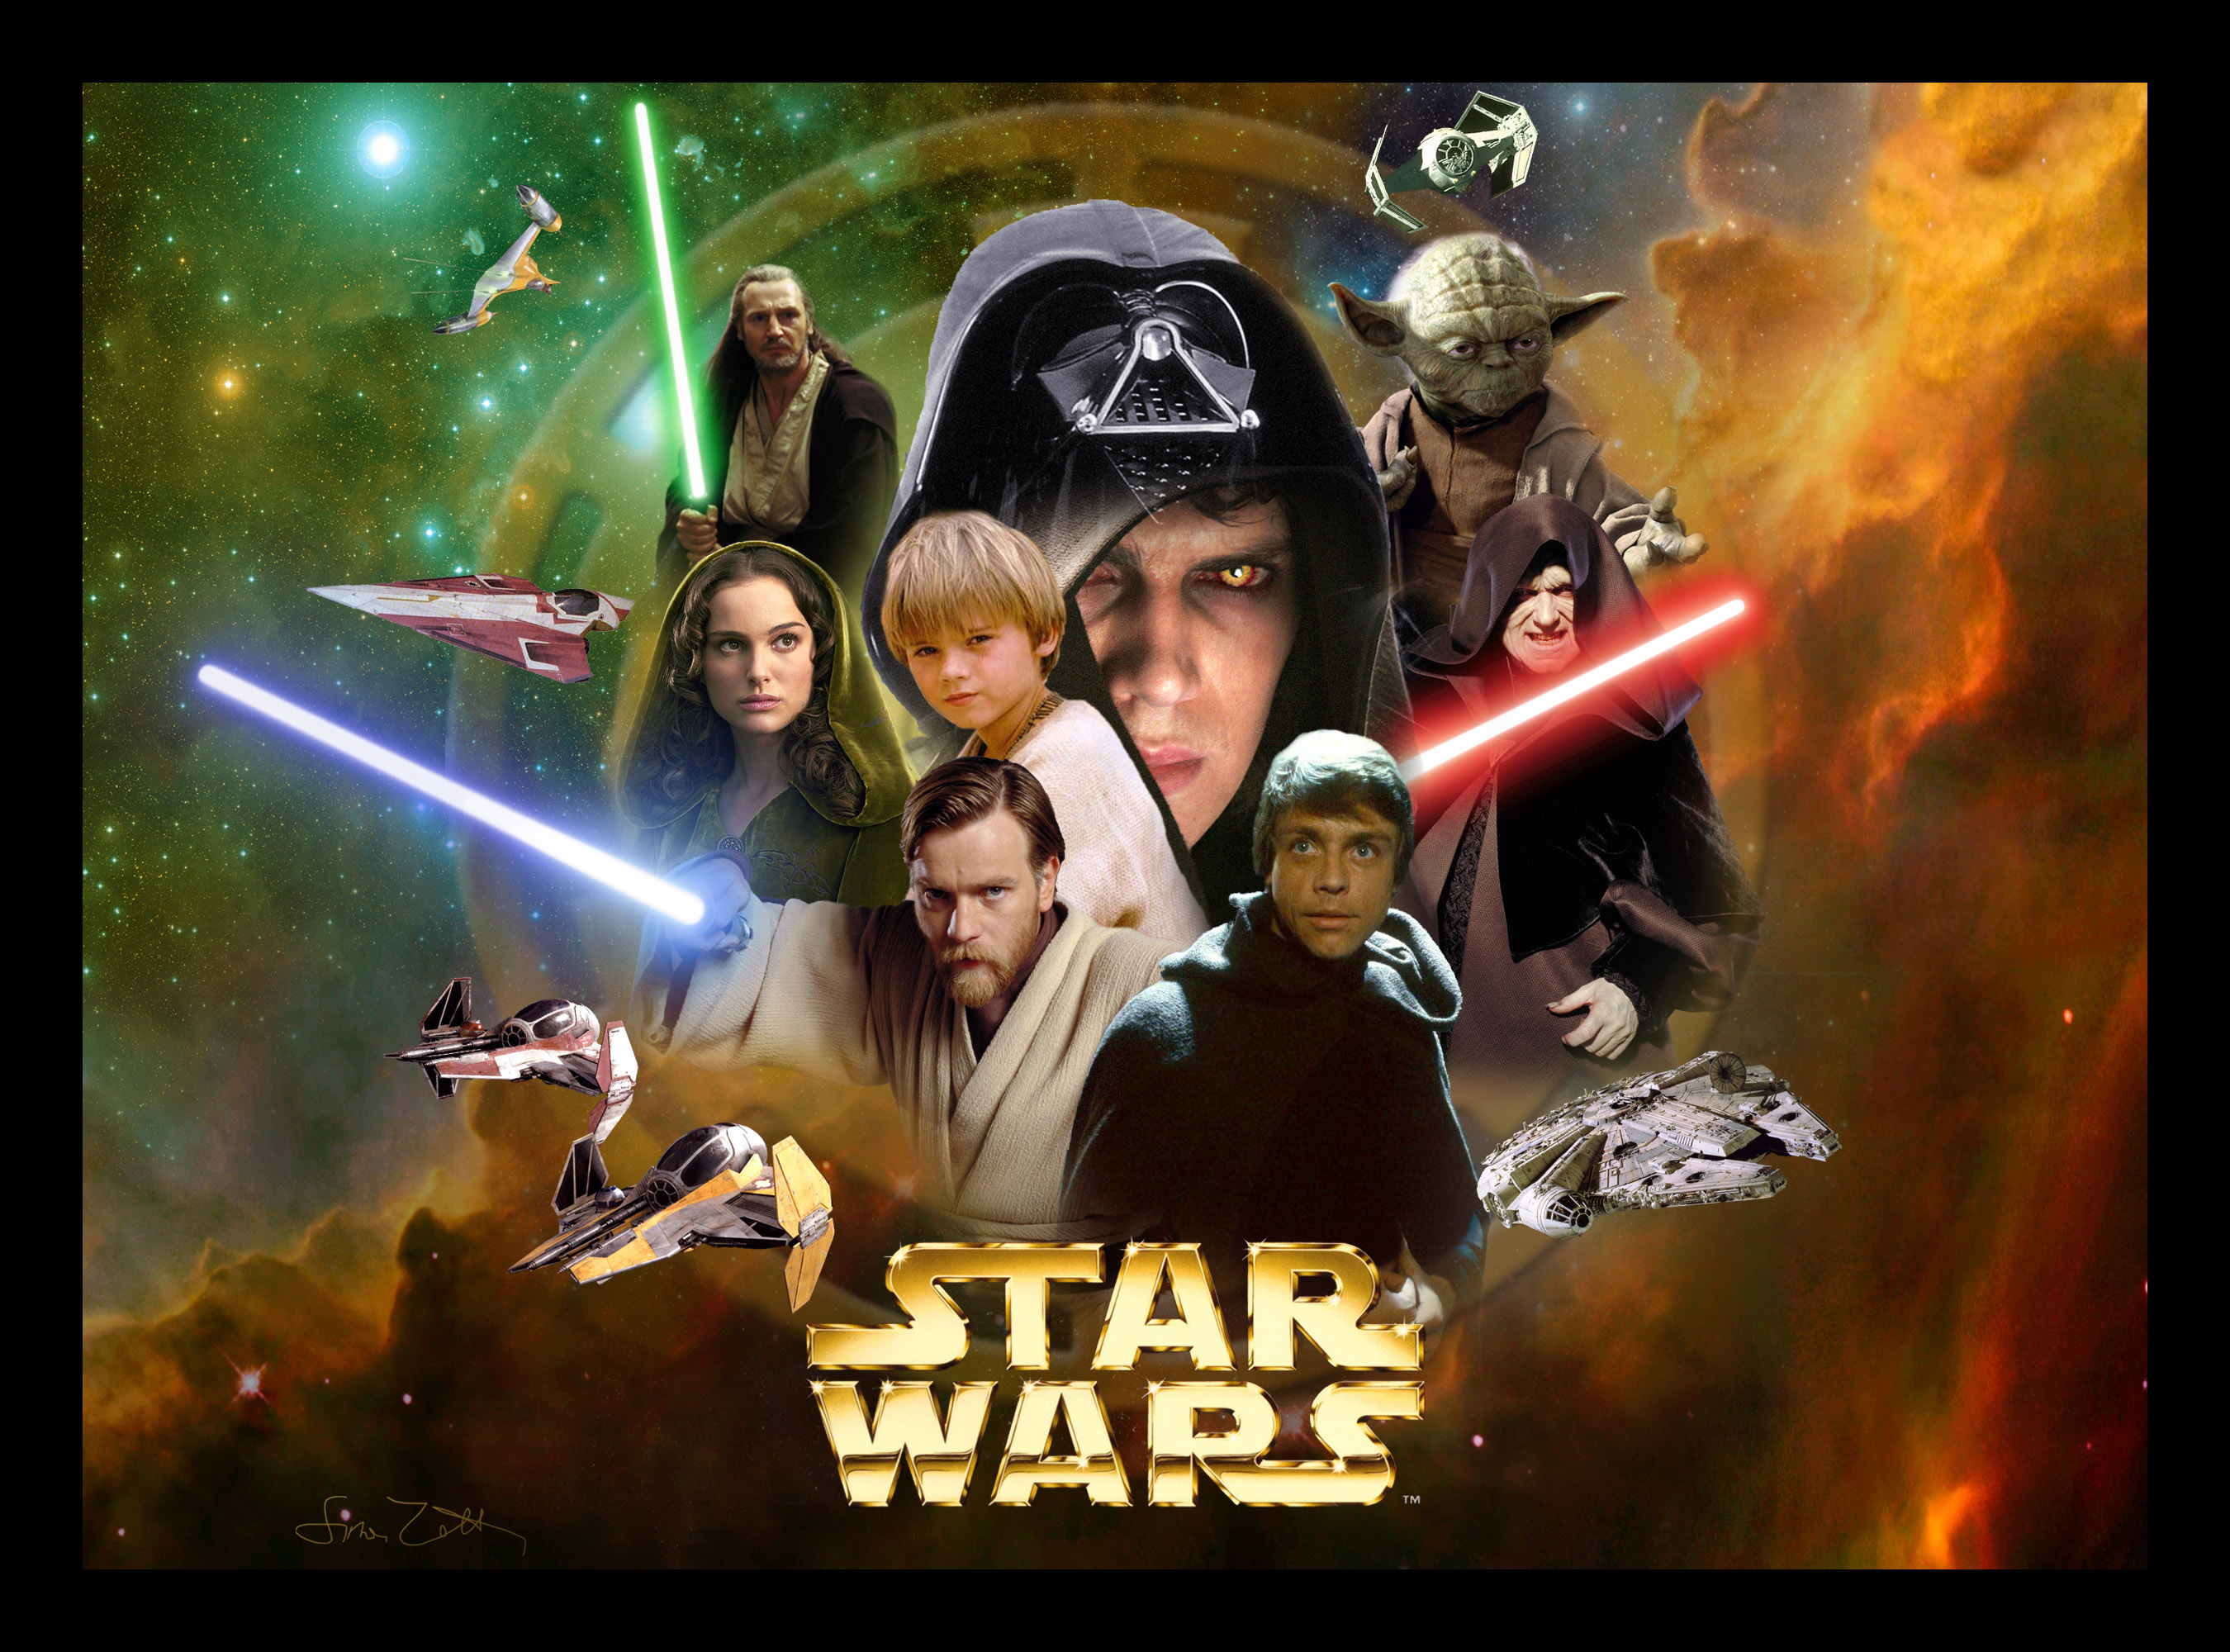 Star Wars Saga Poster Which Concentrates Mostly On Anakin Skywalker